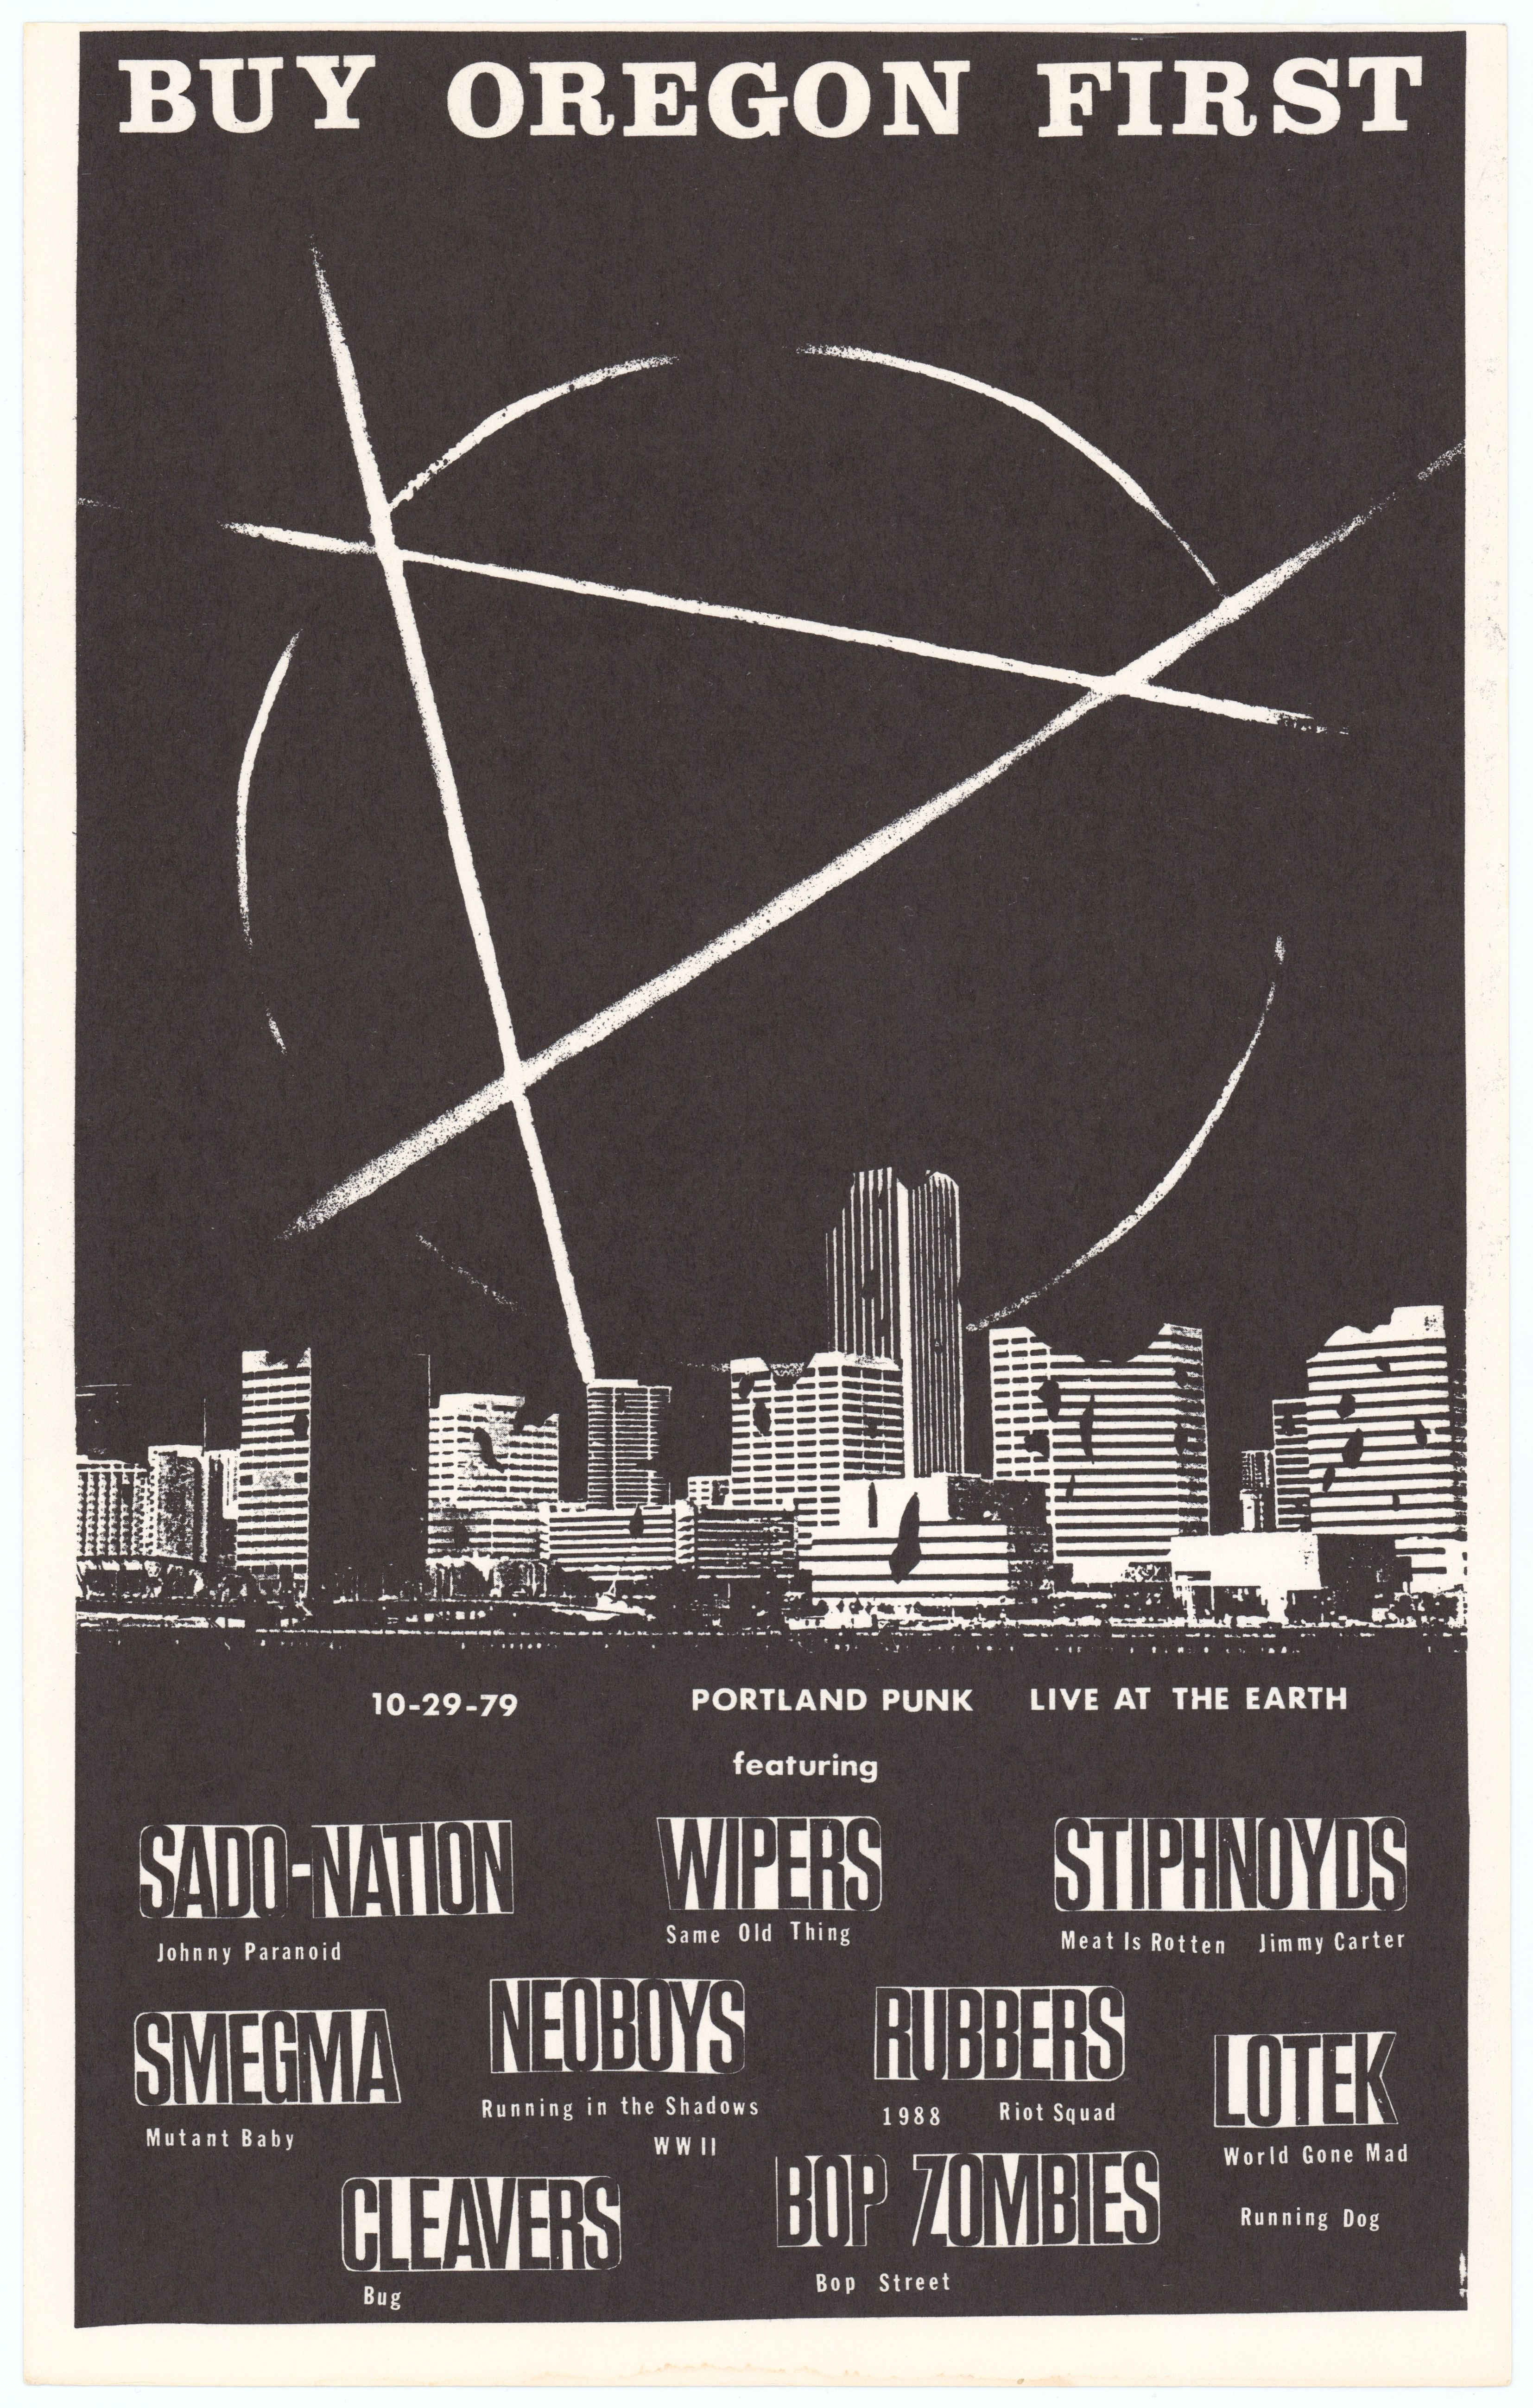 The Wipers & Smegma The Earth 1979 Concert Poster